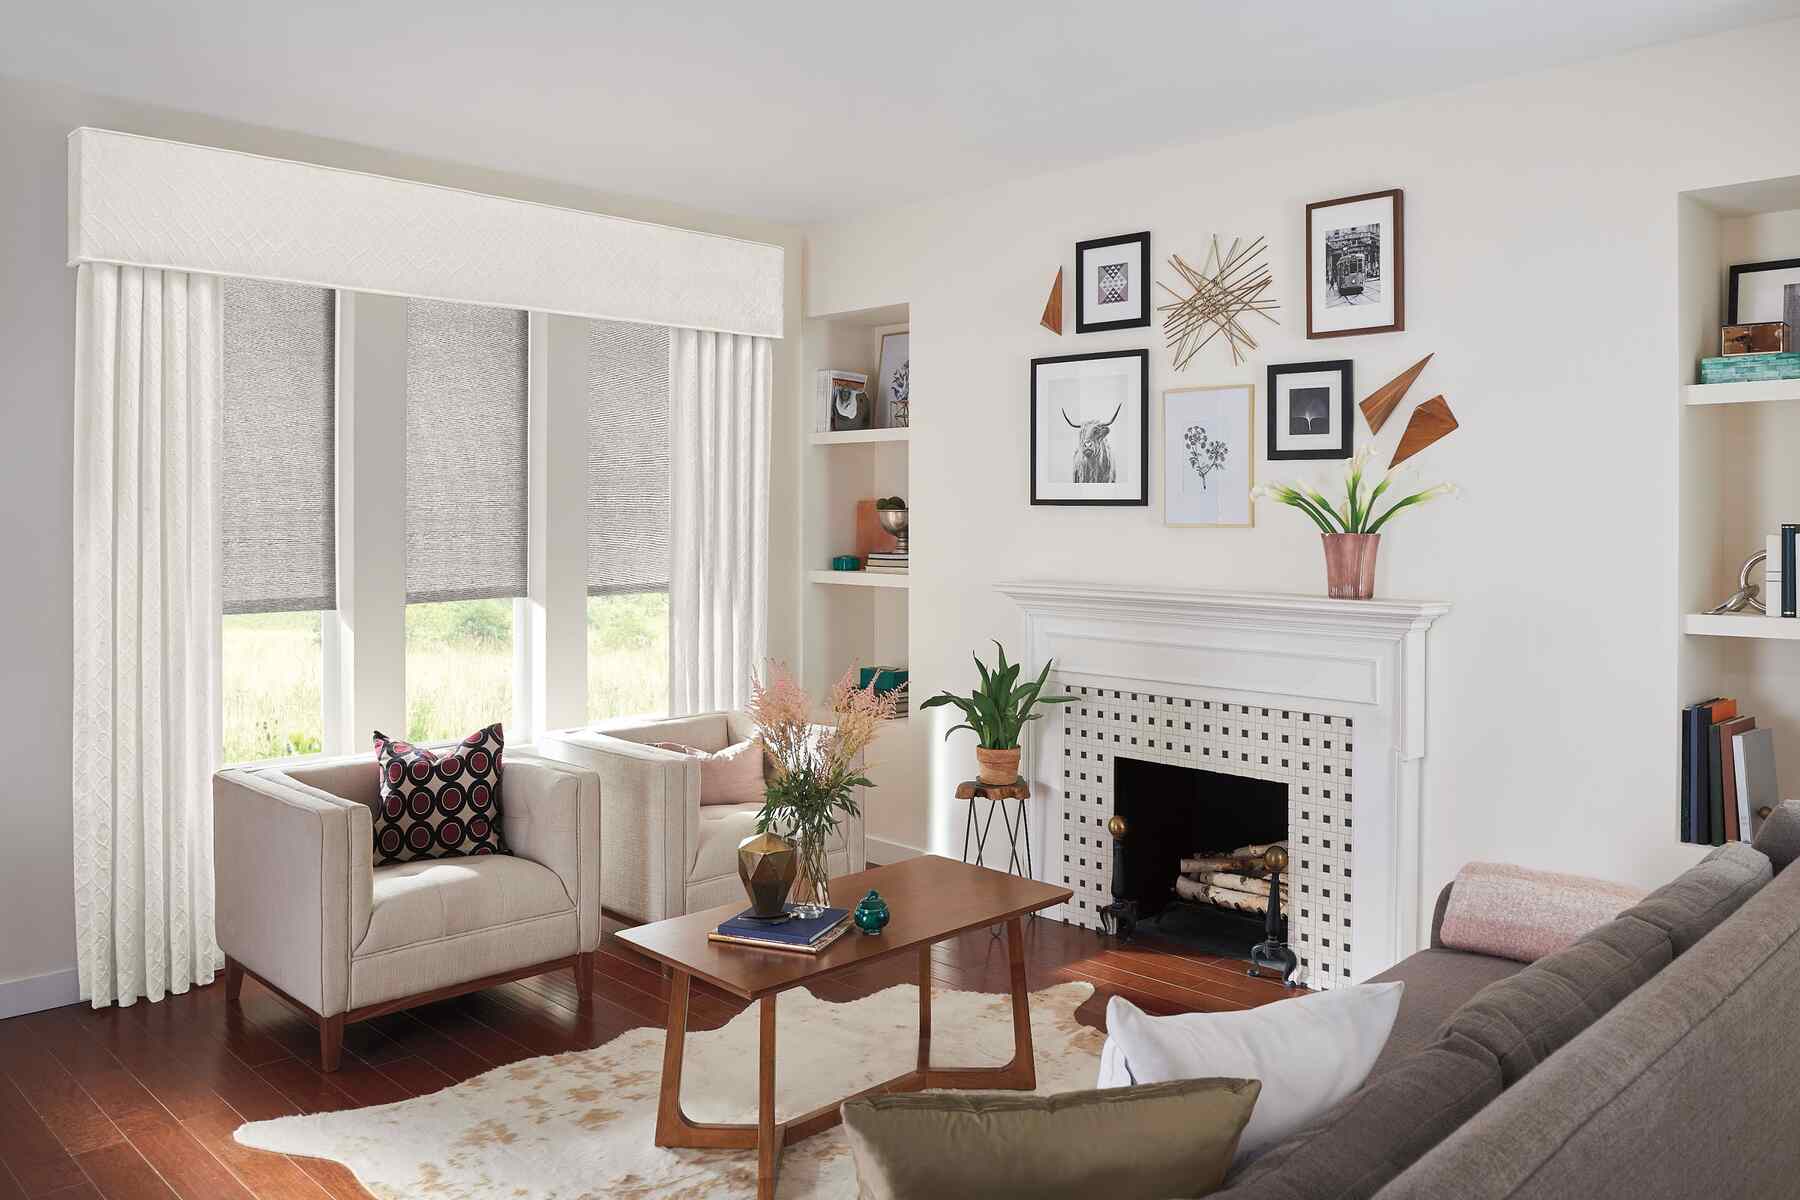 A white room with fireplace, posted frames, small wooden table in the middle and couch